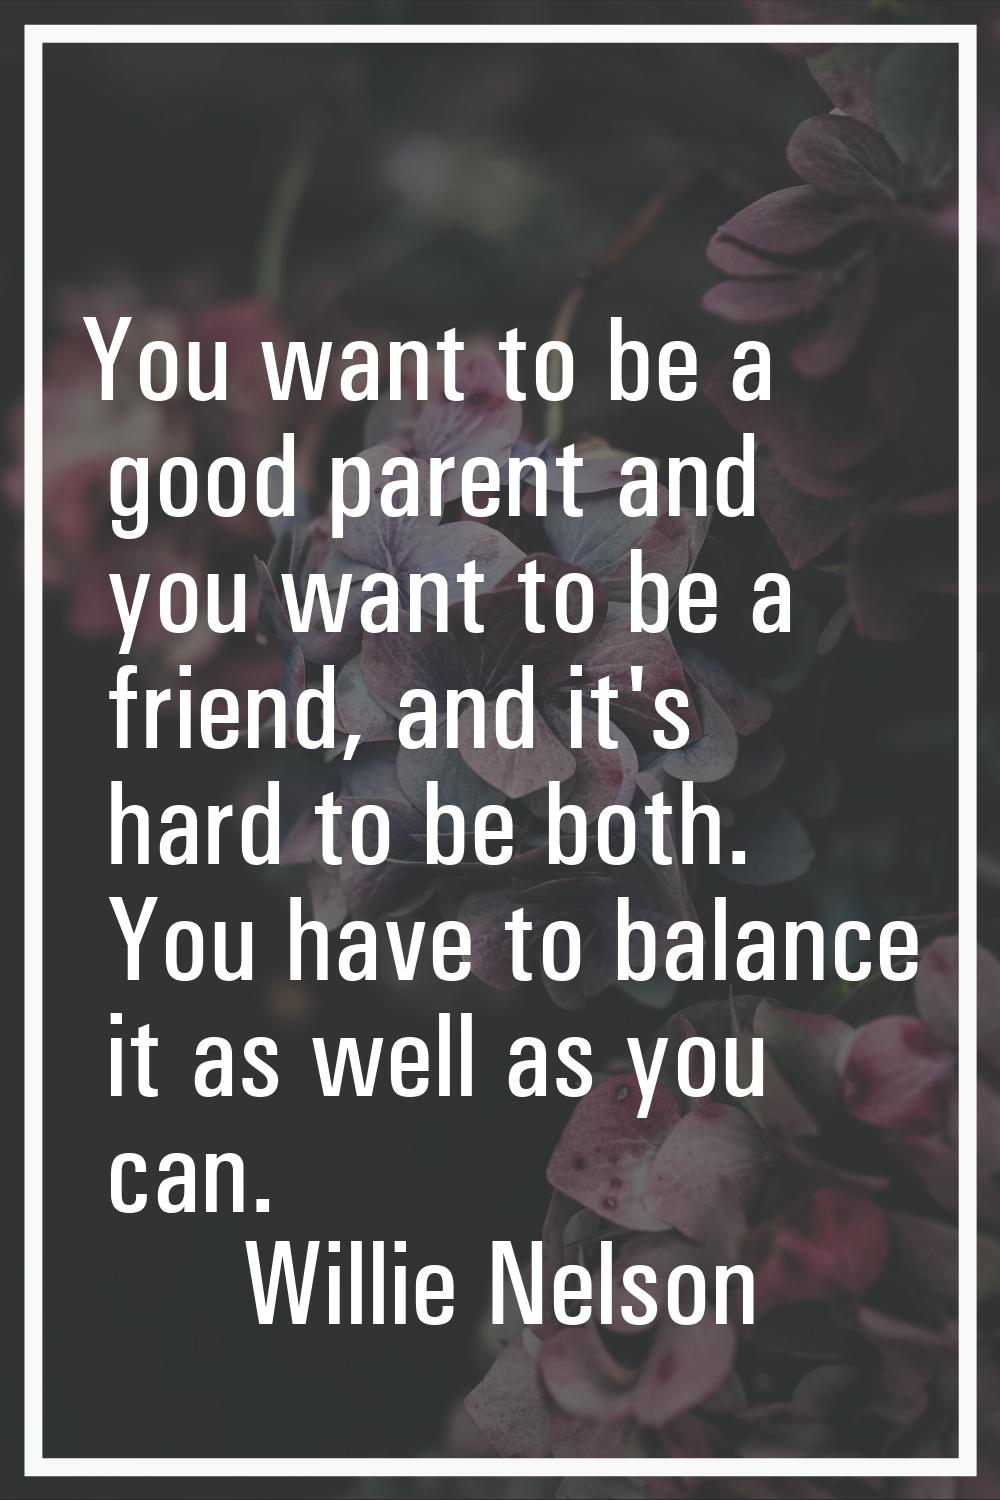 You want to be a good parent and you want to be a friend, and it's hard to be both. You have to bal